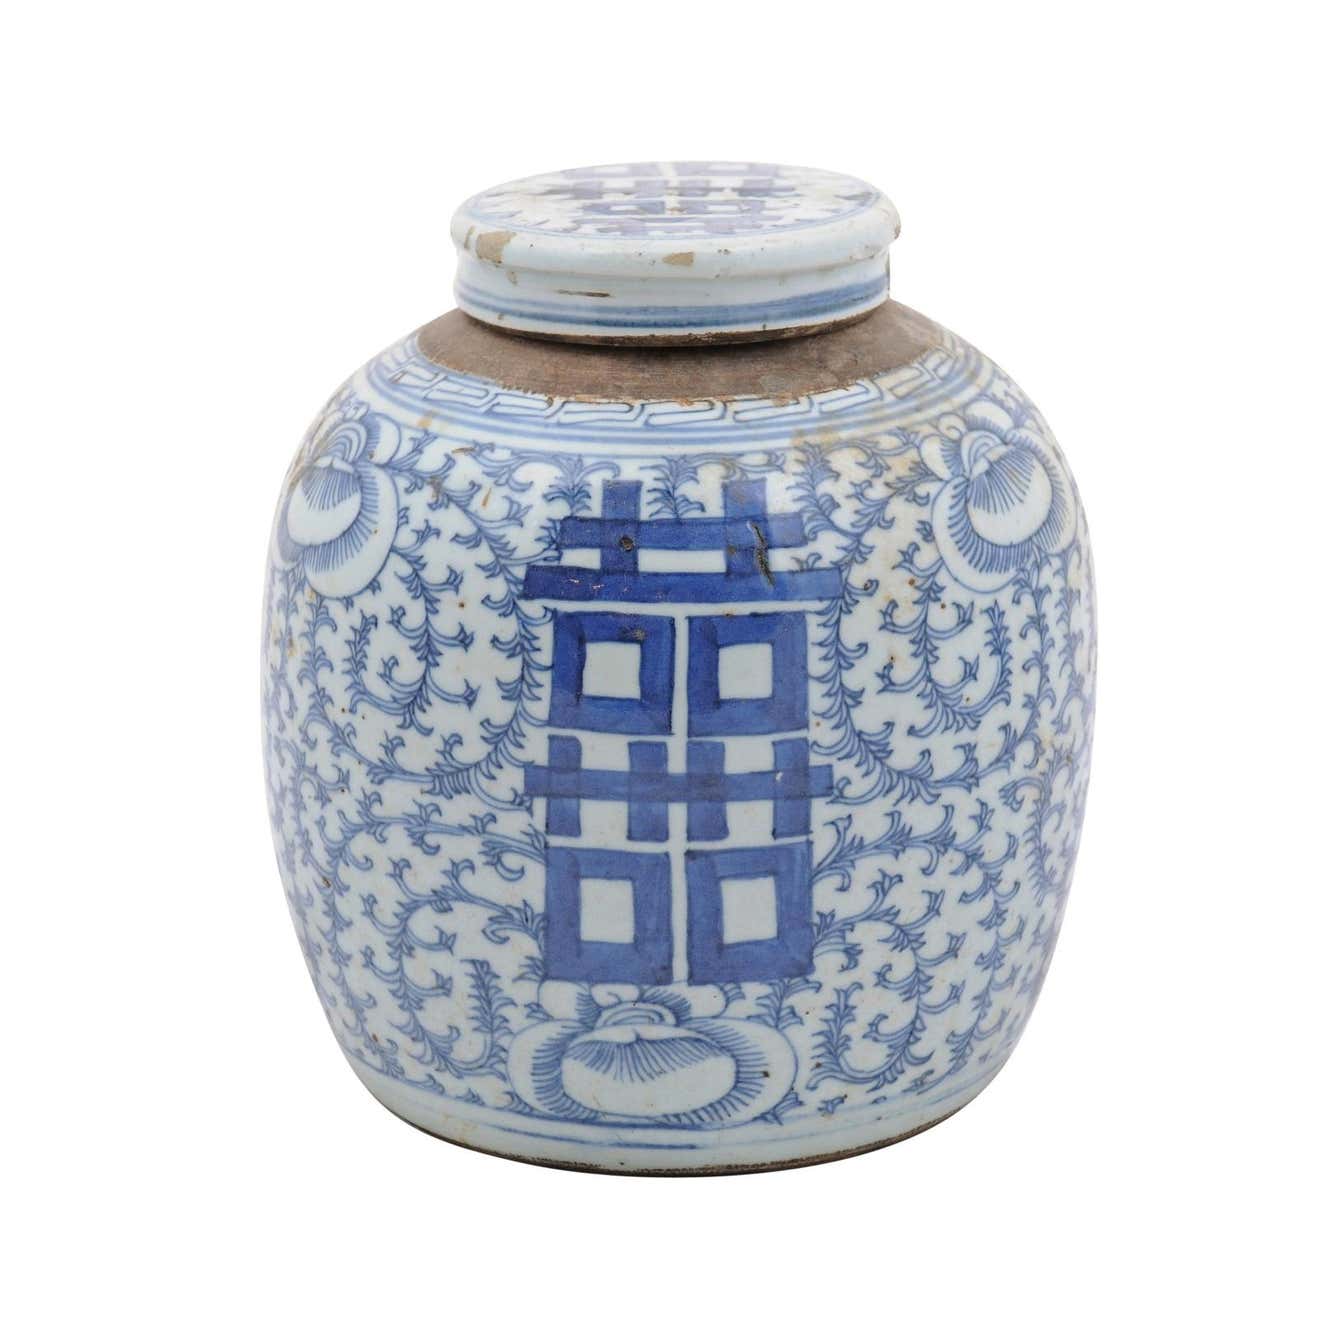 Chinese Export Early 20th Century Blue and White Double Happiness Lidded Jar